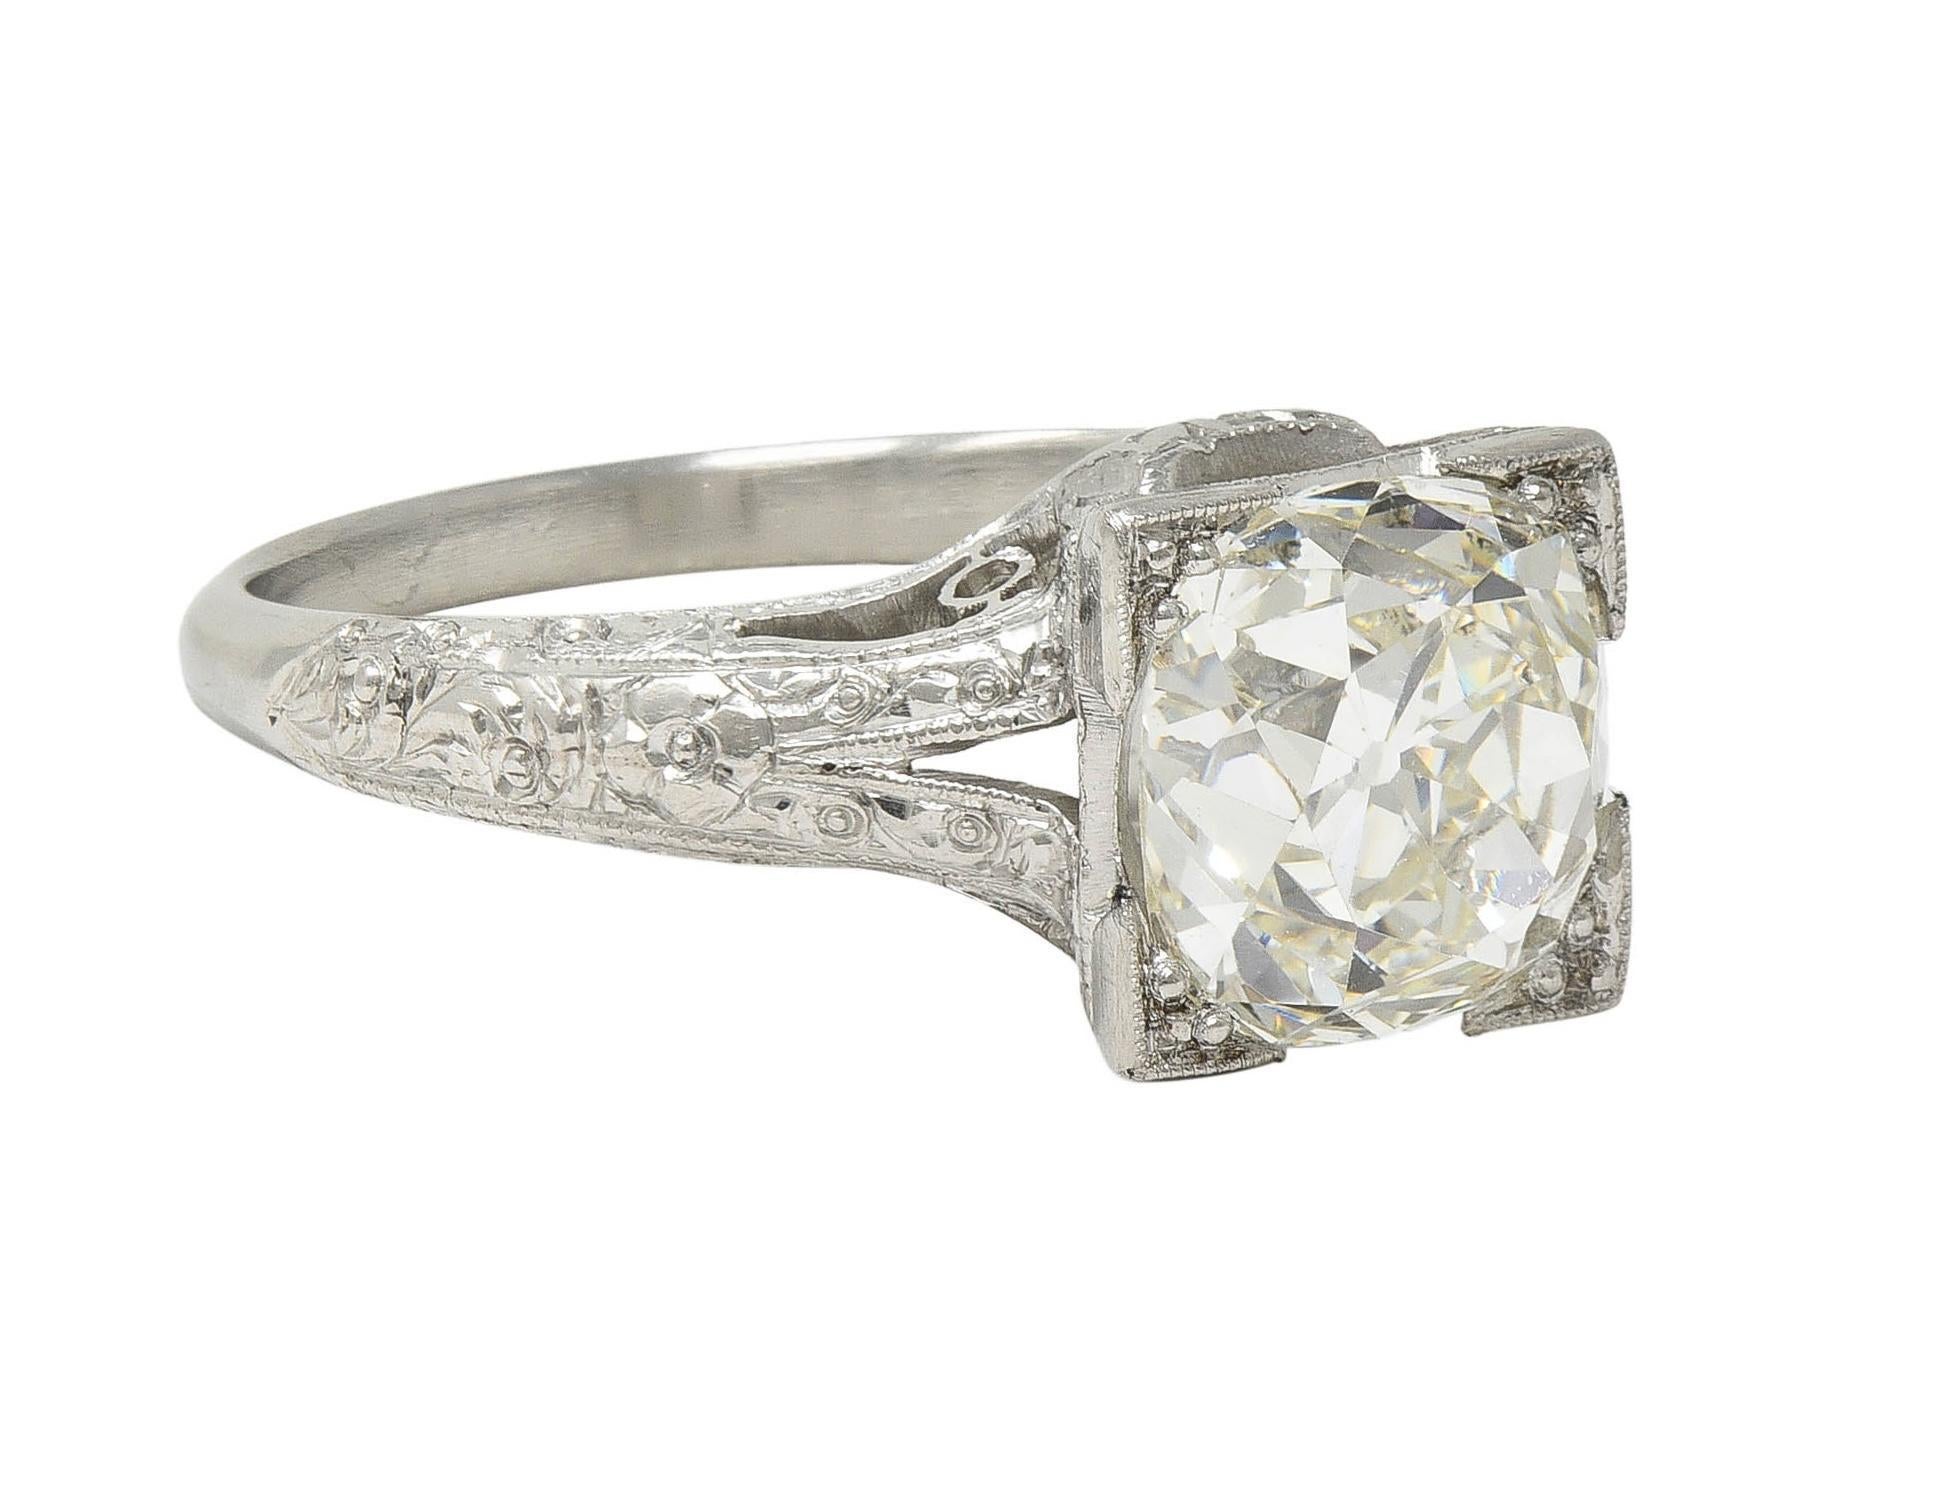 Centering an old mine cut diamond weighing 2.65 carat total - K color with VS1 clarity
Bead set in a square form head with milgrain edges and flanked by cathedral shoulders
Pierced with engraved orange blossom and scrolled motif details
Stamped for